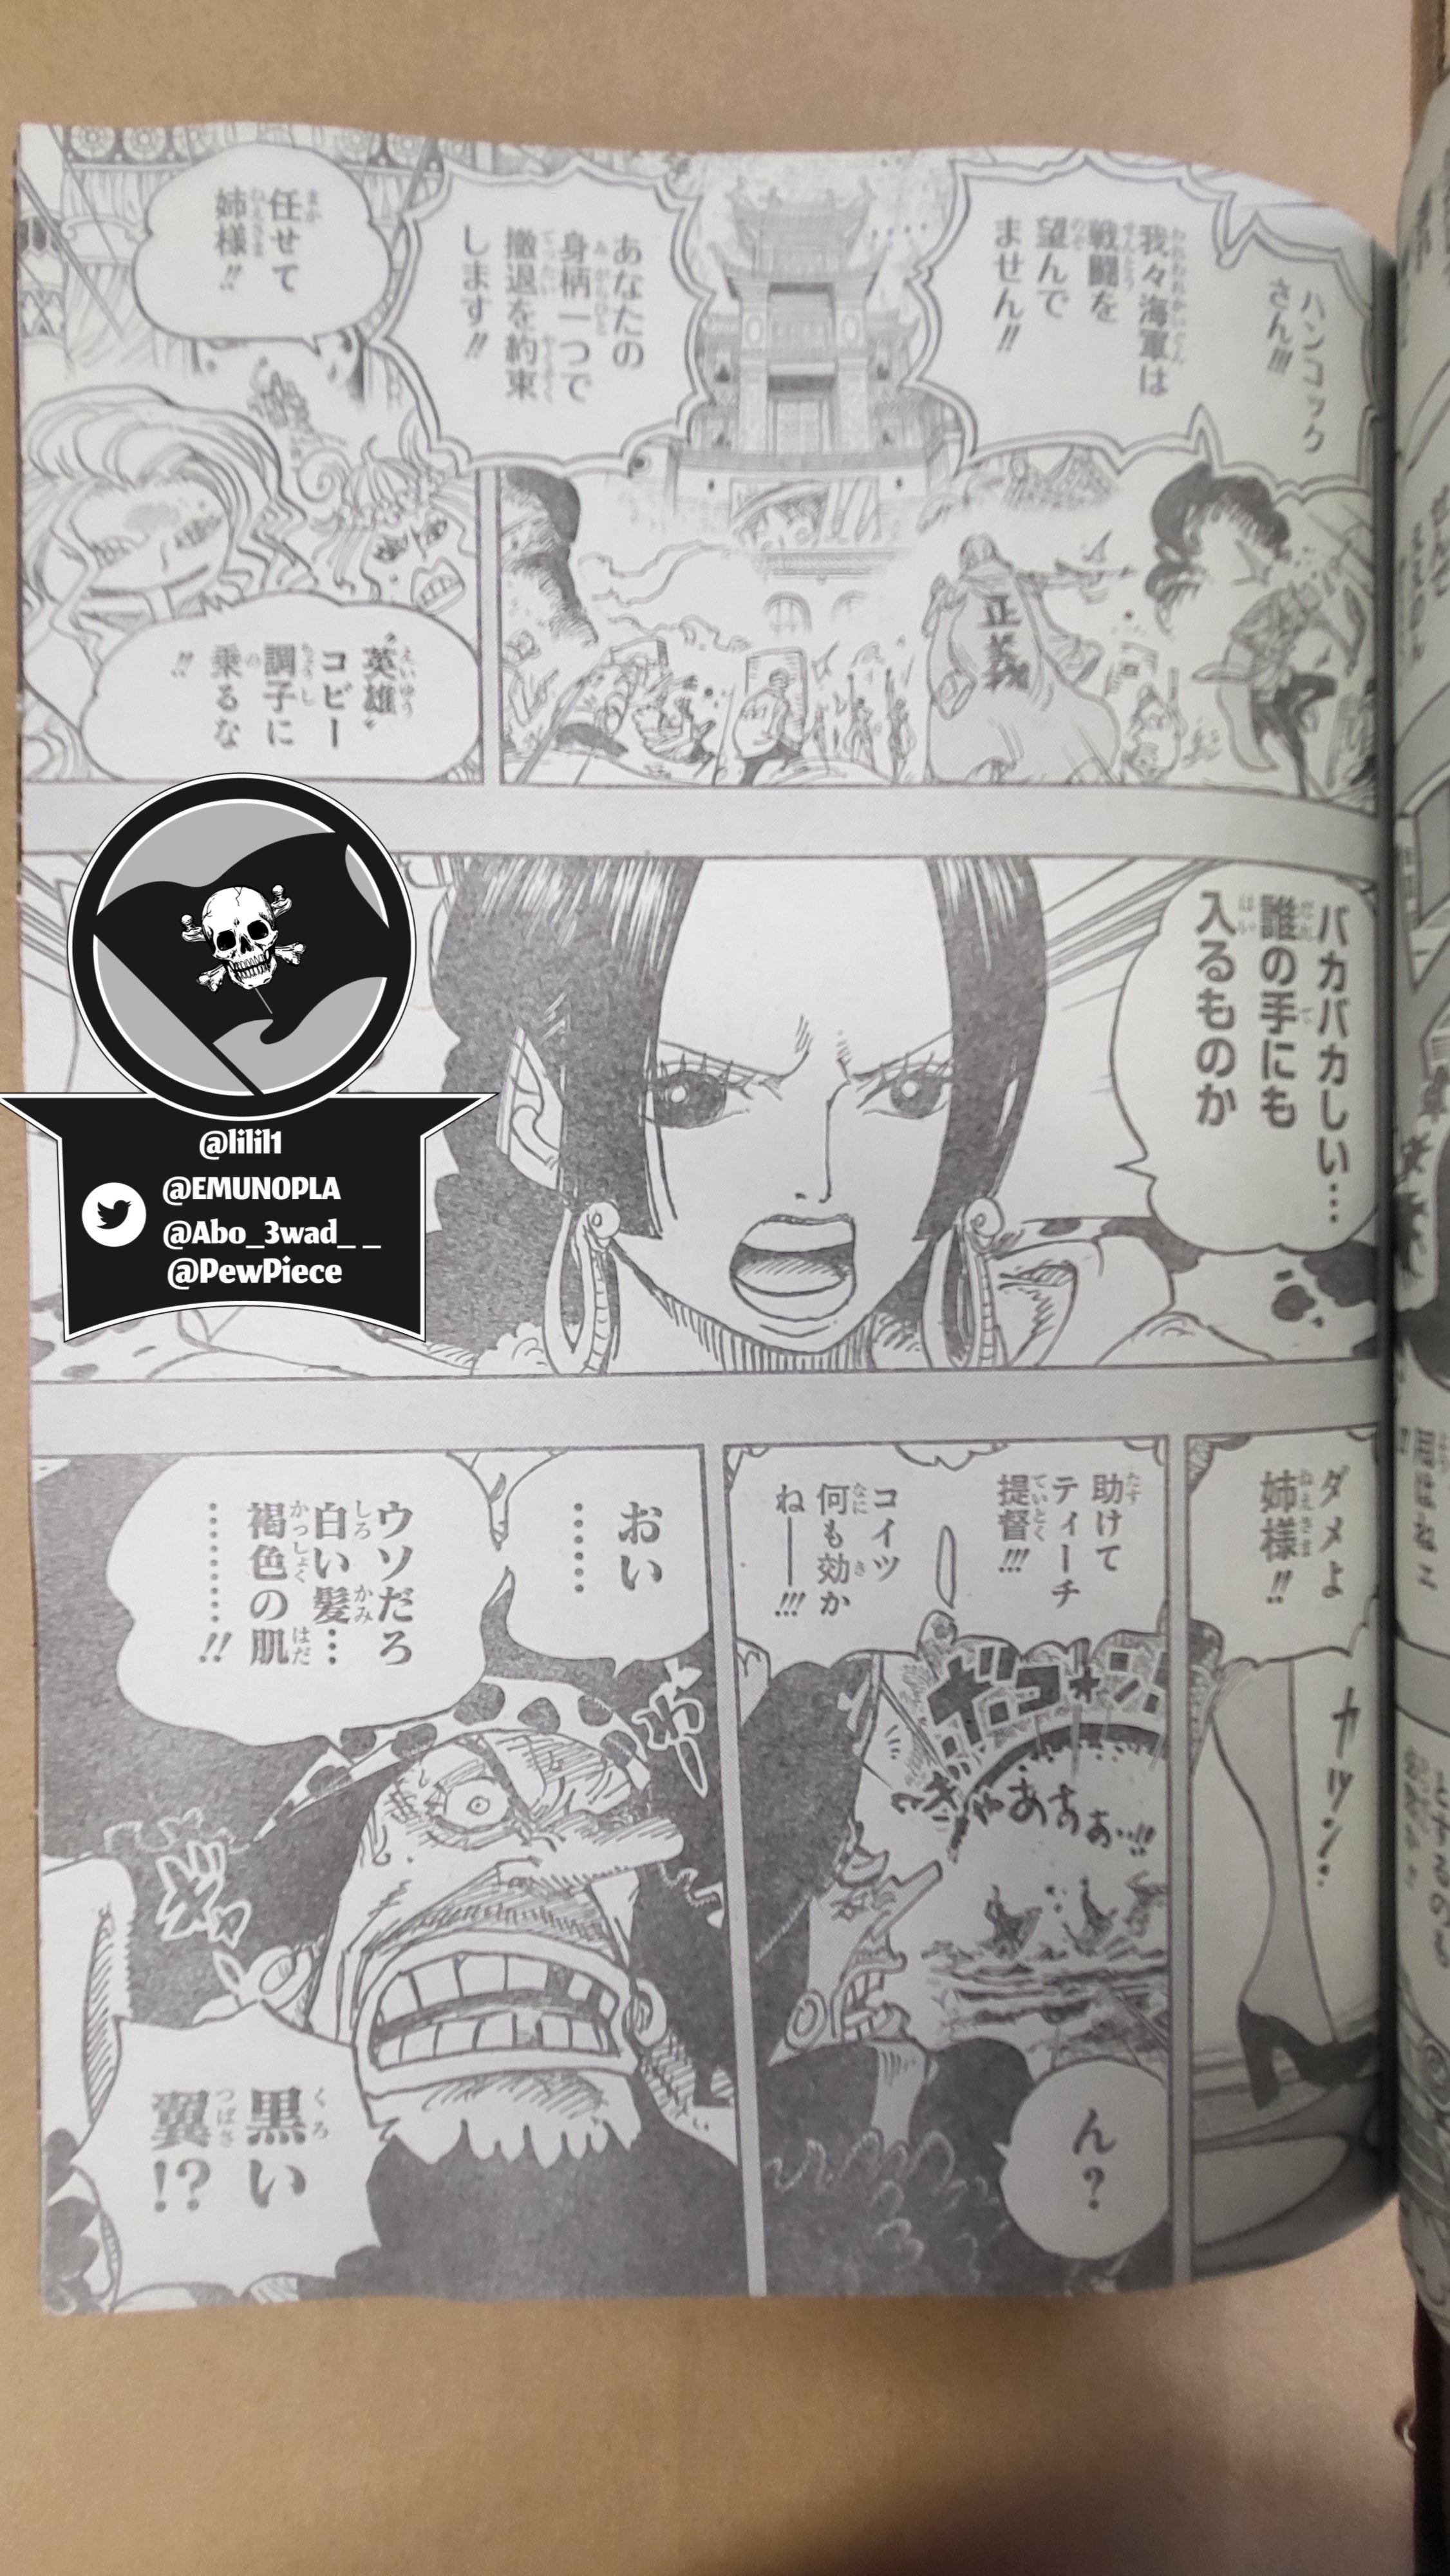 One Piece Chapter 1059 spoilers: Boa Hanocack's new bounty & Koby's  abduction